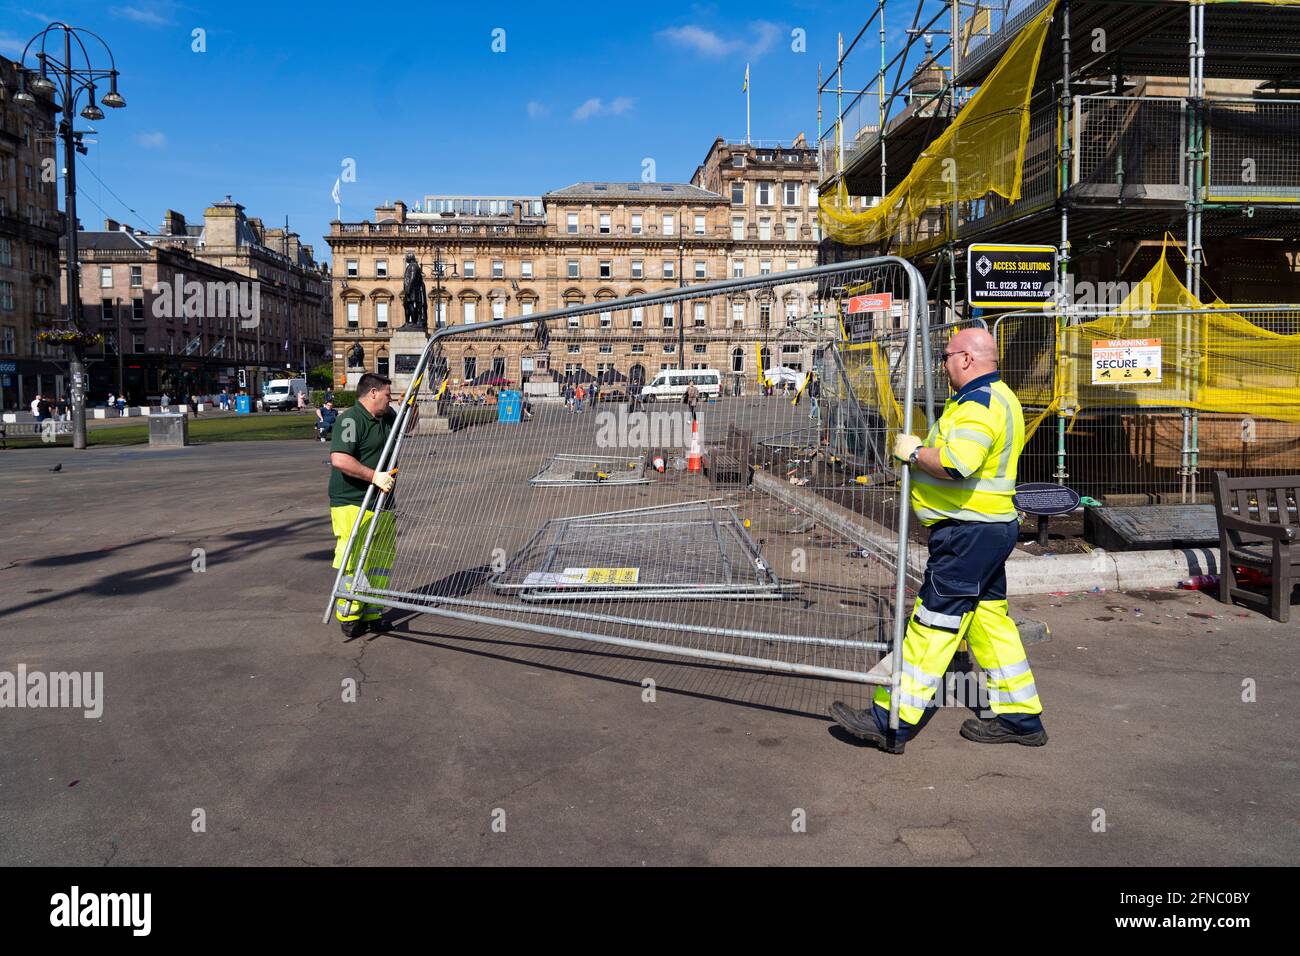 Glasgow, Scotland, UK. 16 May 2021. City cleansing department clearing up damage in George Square after yesterday’s mass celebration by Rangers fans following their Premiership league win. Iain Masterton/Alamy Live News Stock Photo